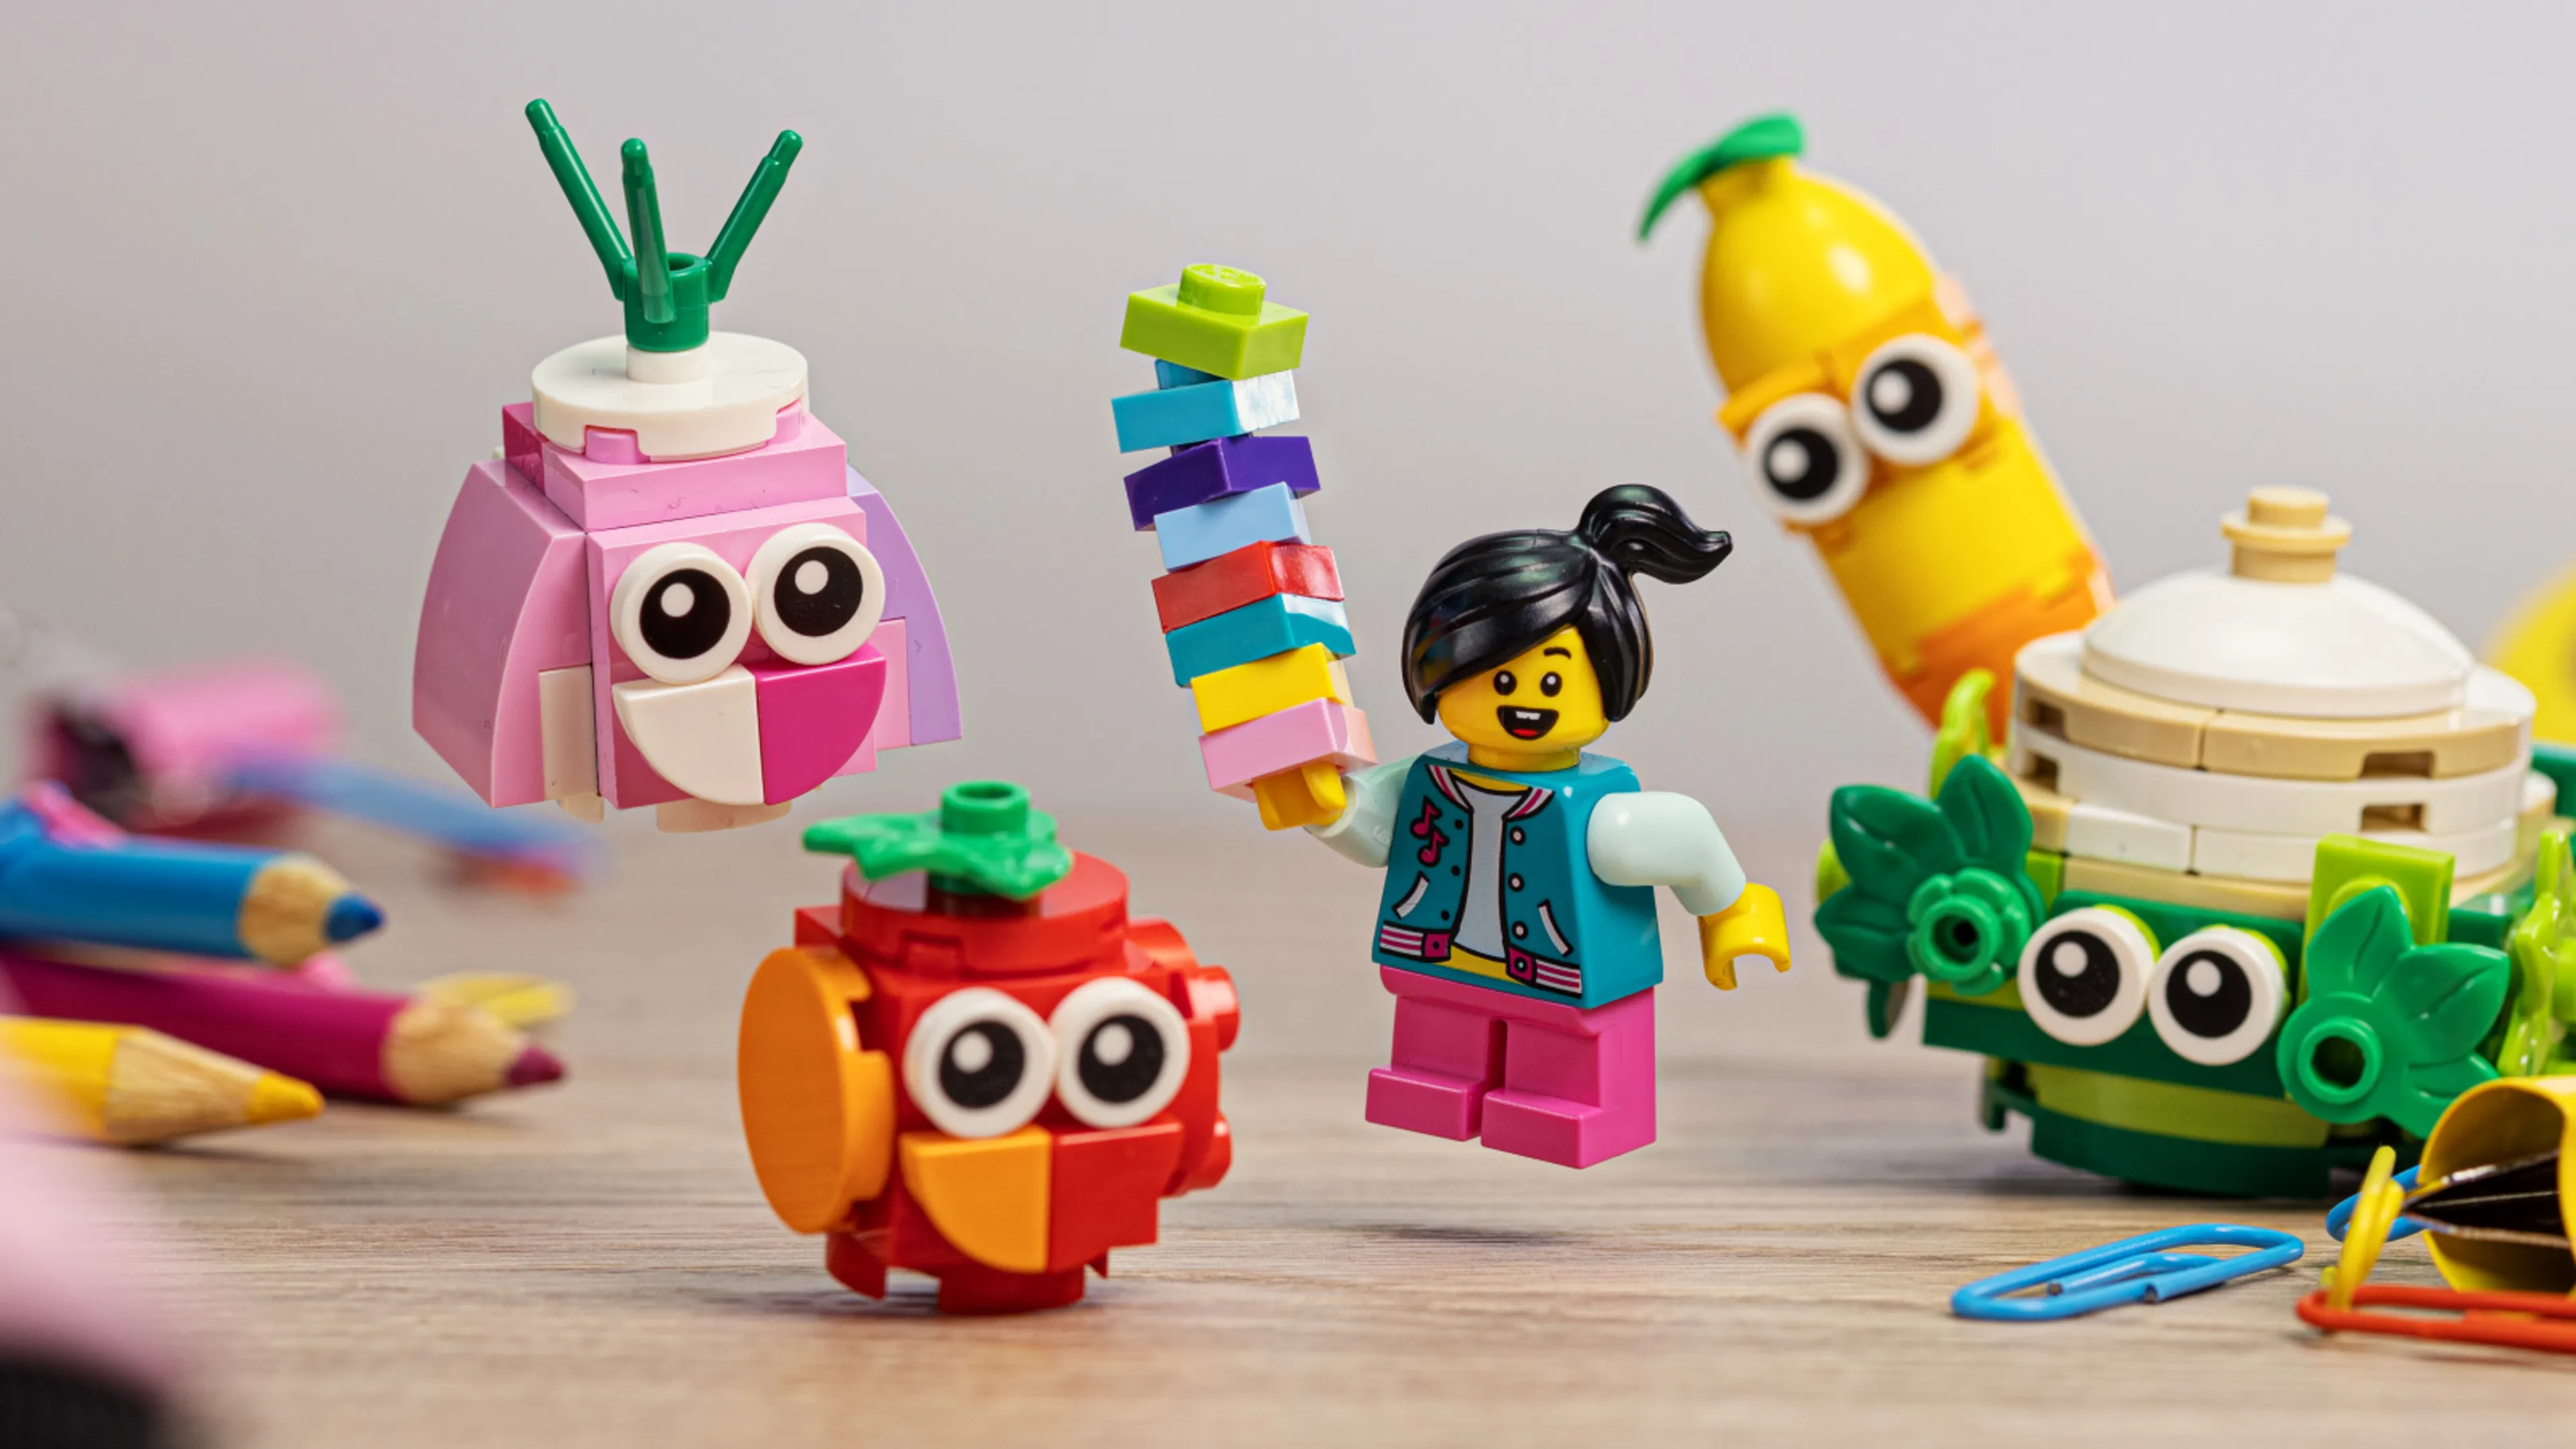 LEGO creatures with a minifigure